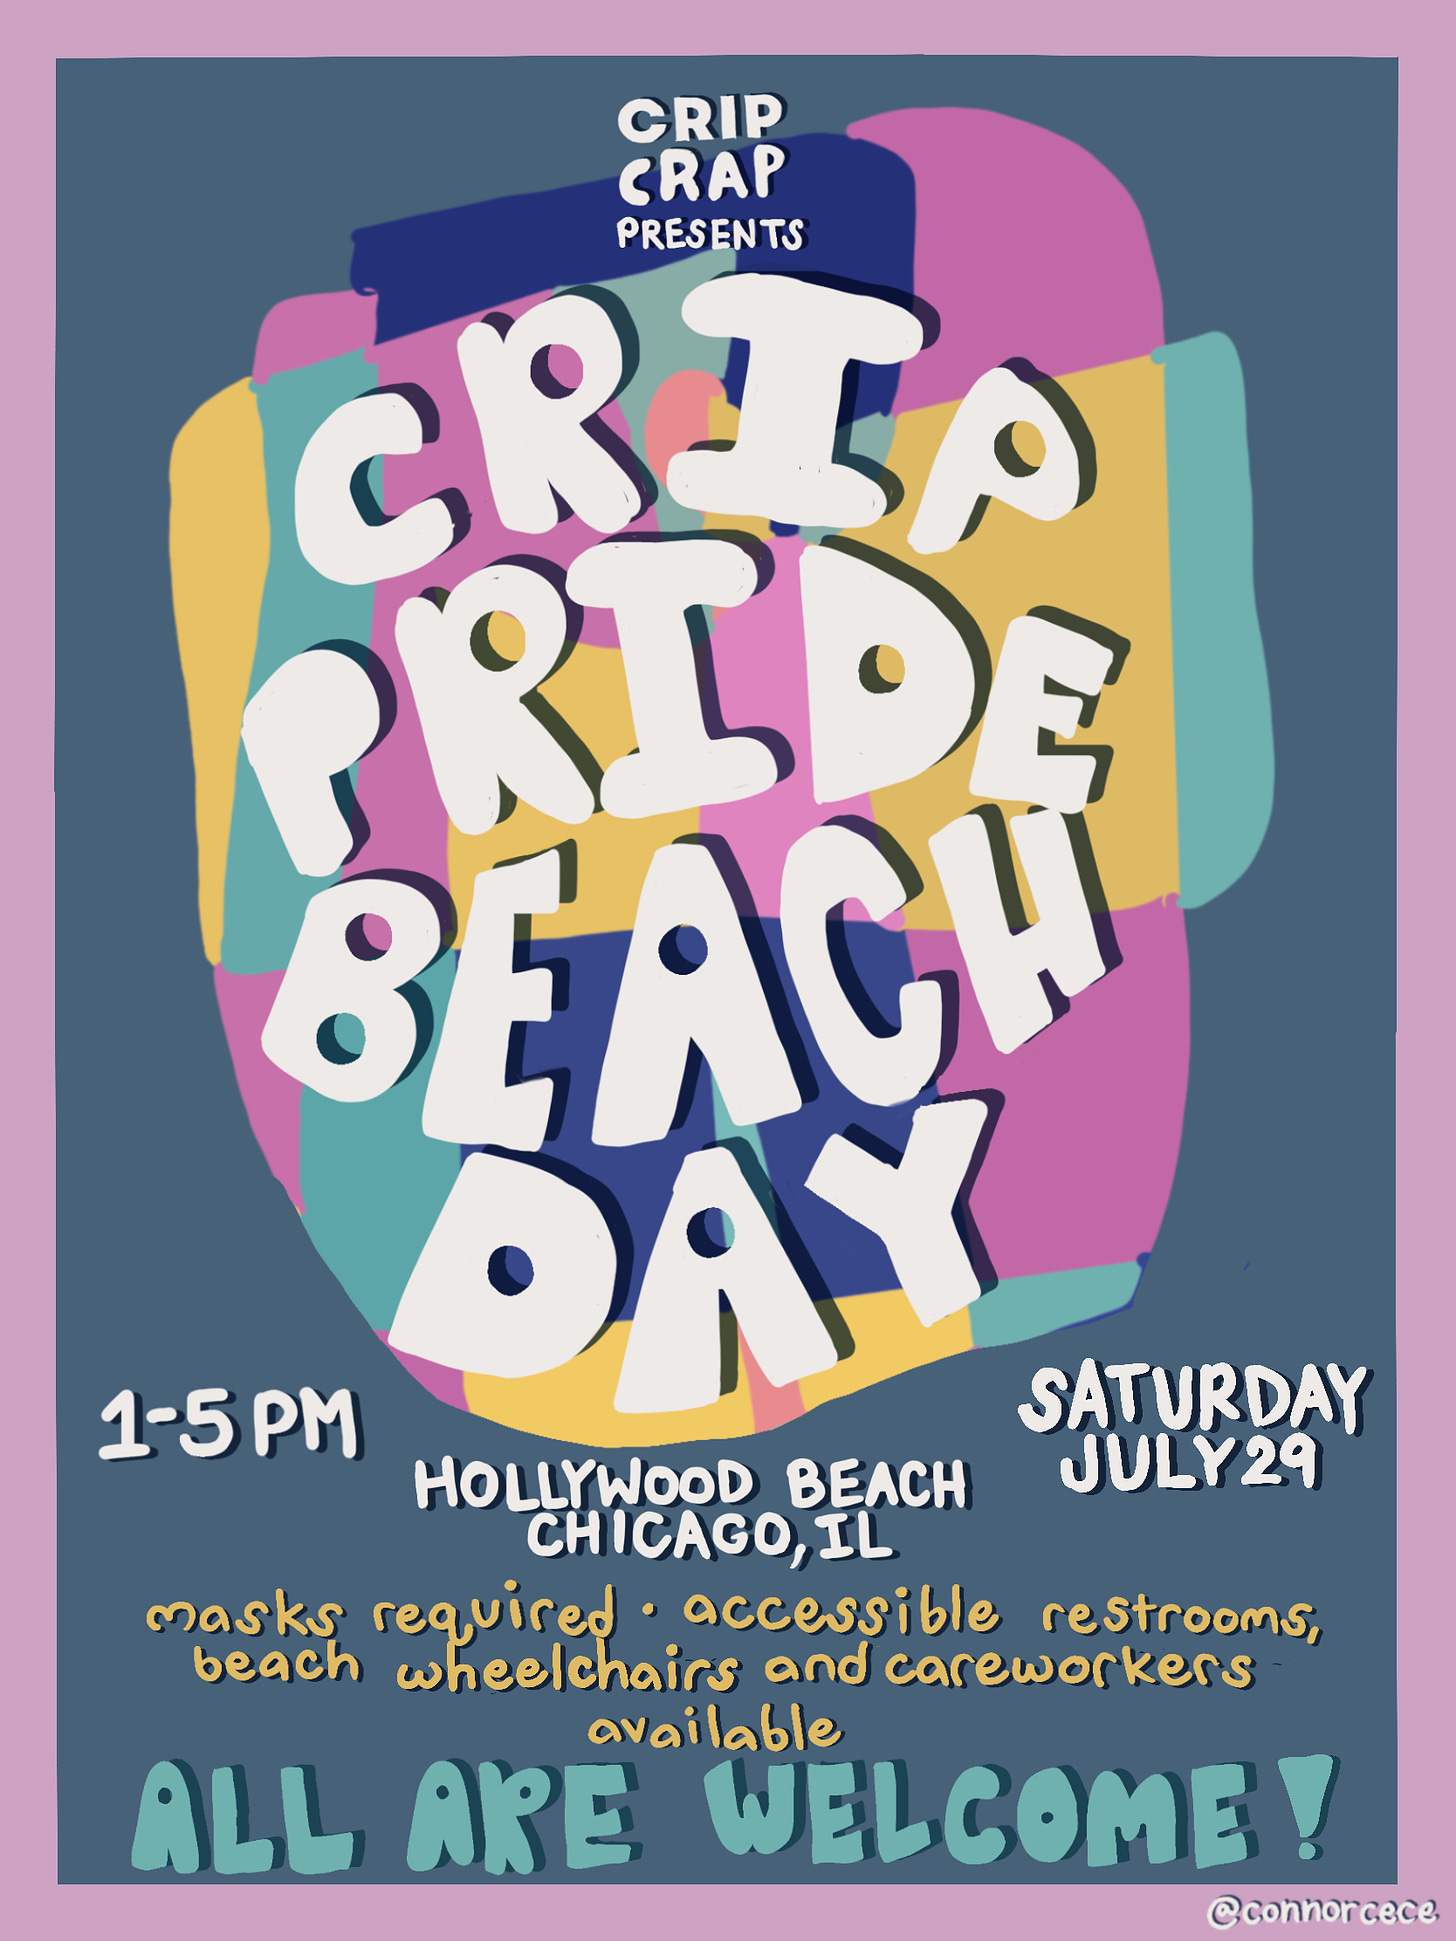 White, yellow, and blue text on a colorful background reads: Crip Crap Presents Crip Pride Beach Day 1-5PM Hollywood Beach Chicago, IL Saturday July 29 Masks required, accessible restrooms, beach wheelchairs, and care workers available All are welcome!